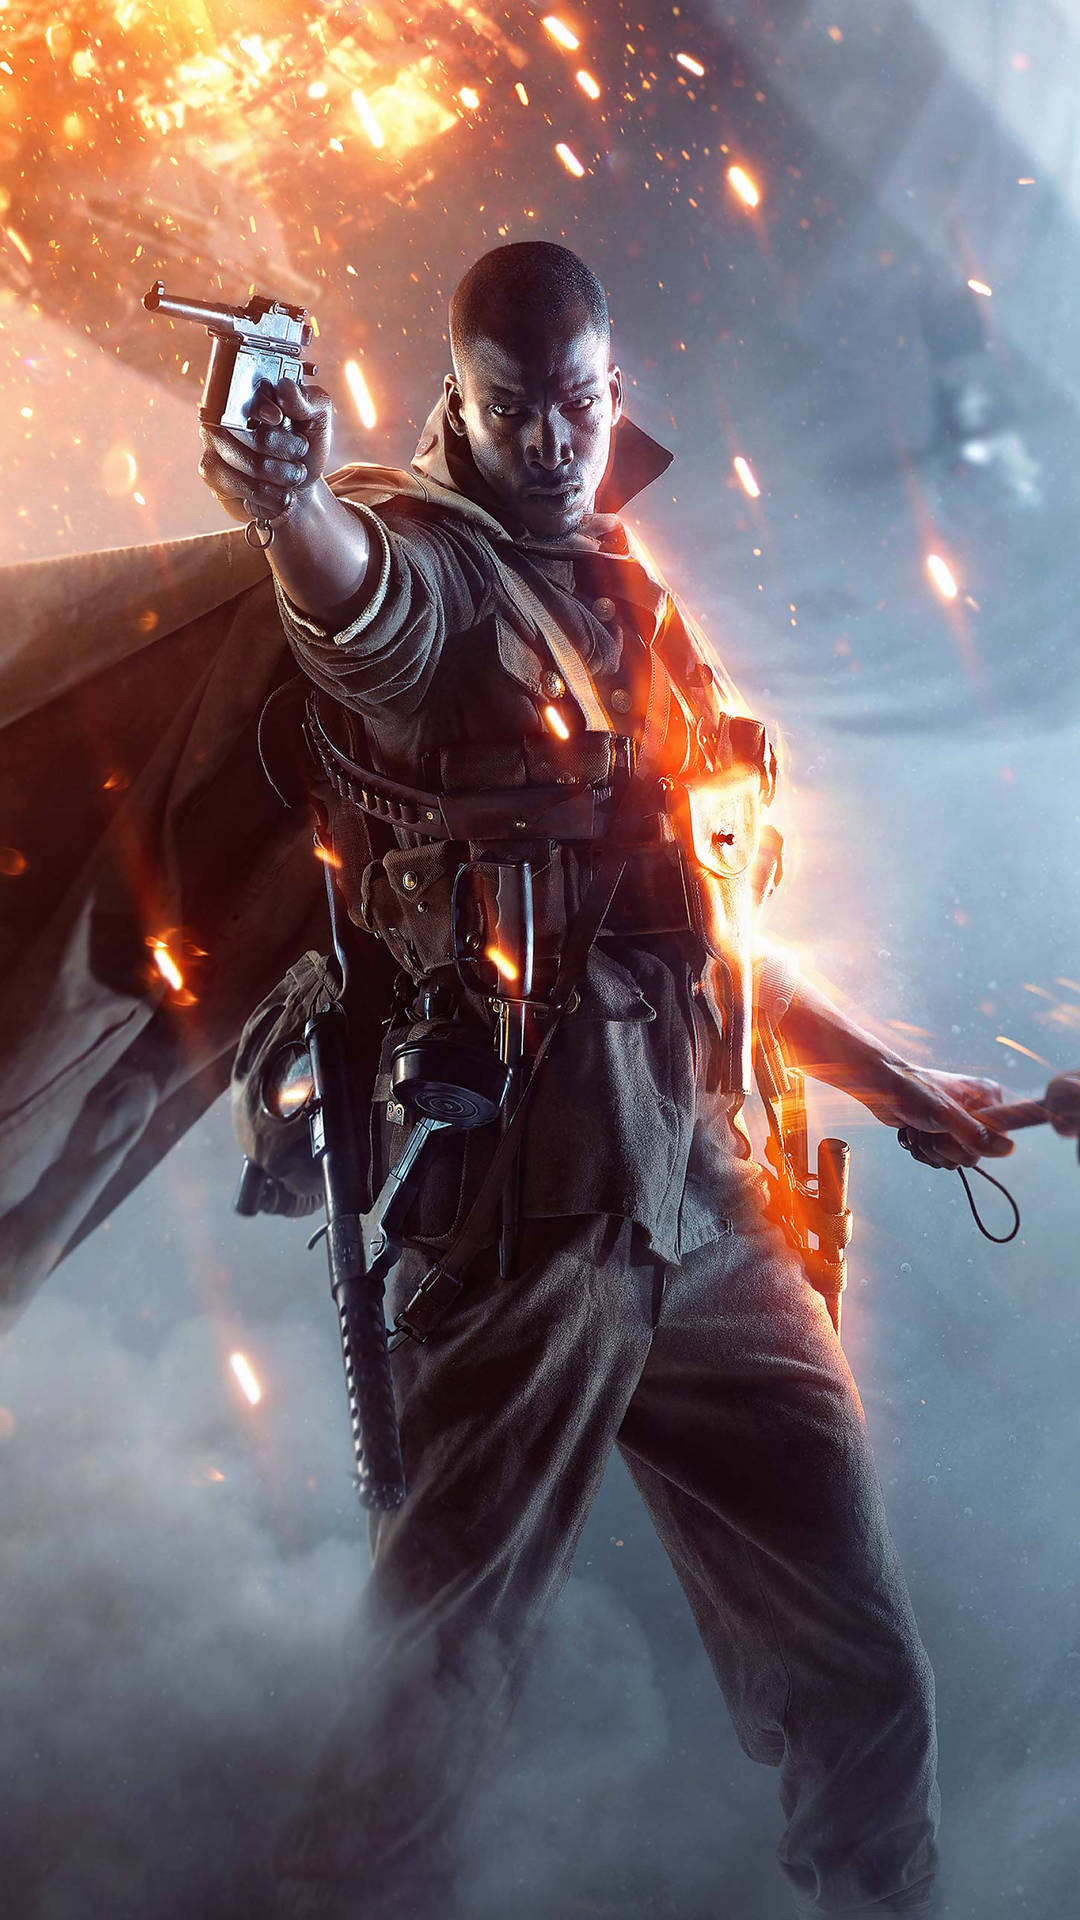 Thrilling Battlefield 1 Action Captured In 4k Resolution For Phone